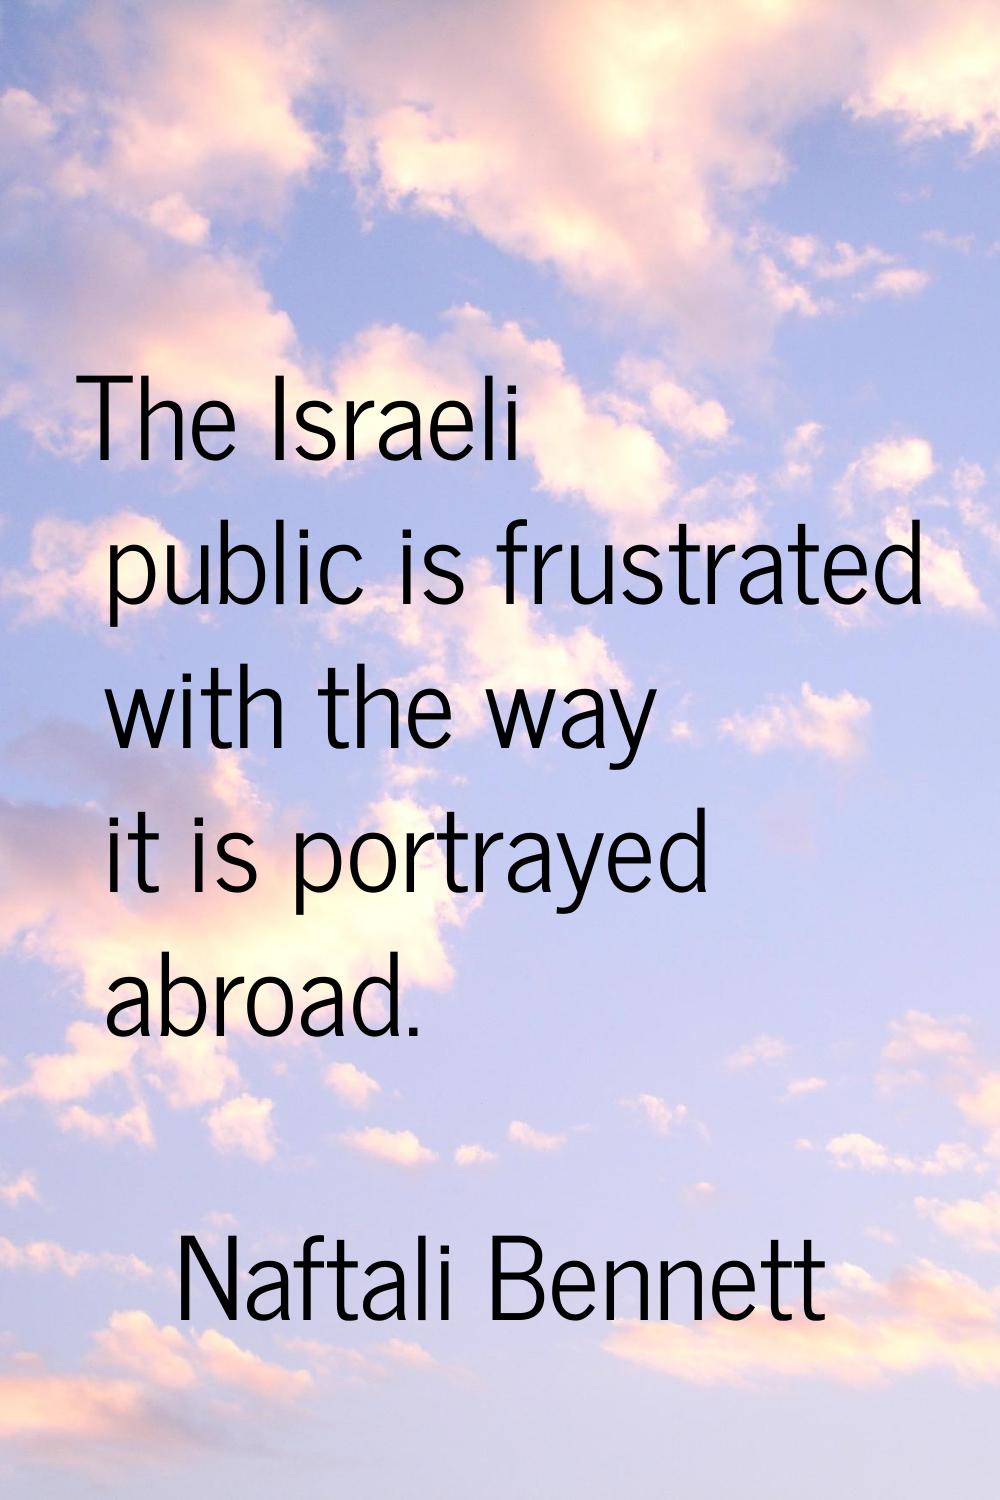 The Israeli public is frustrated with the way it is portrayed abroad.